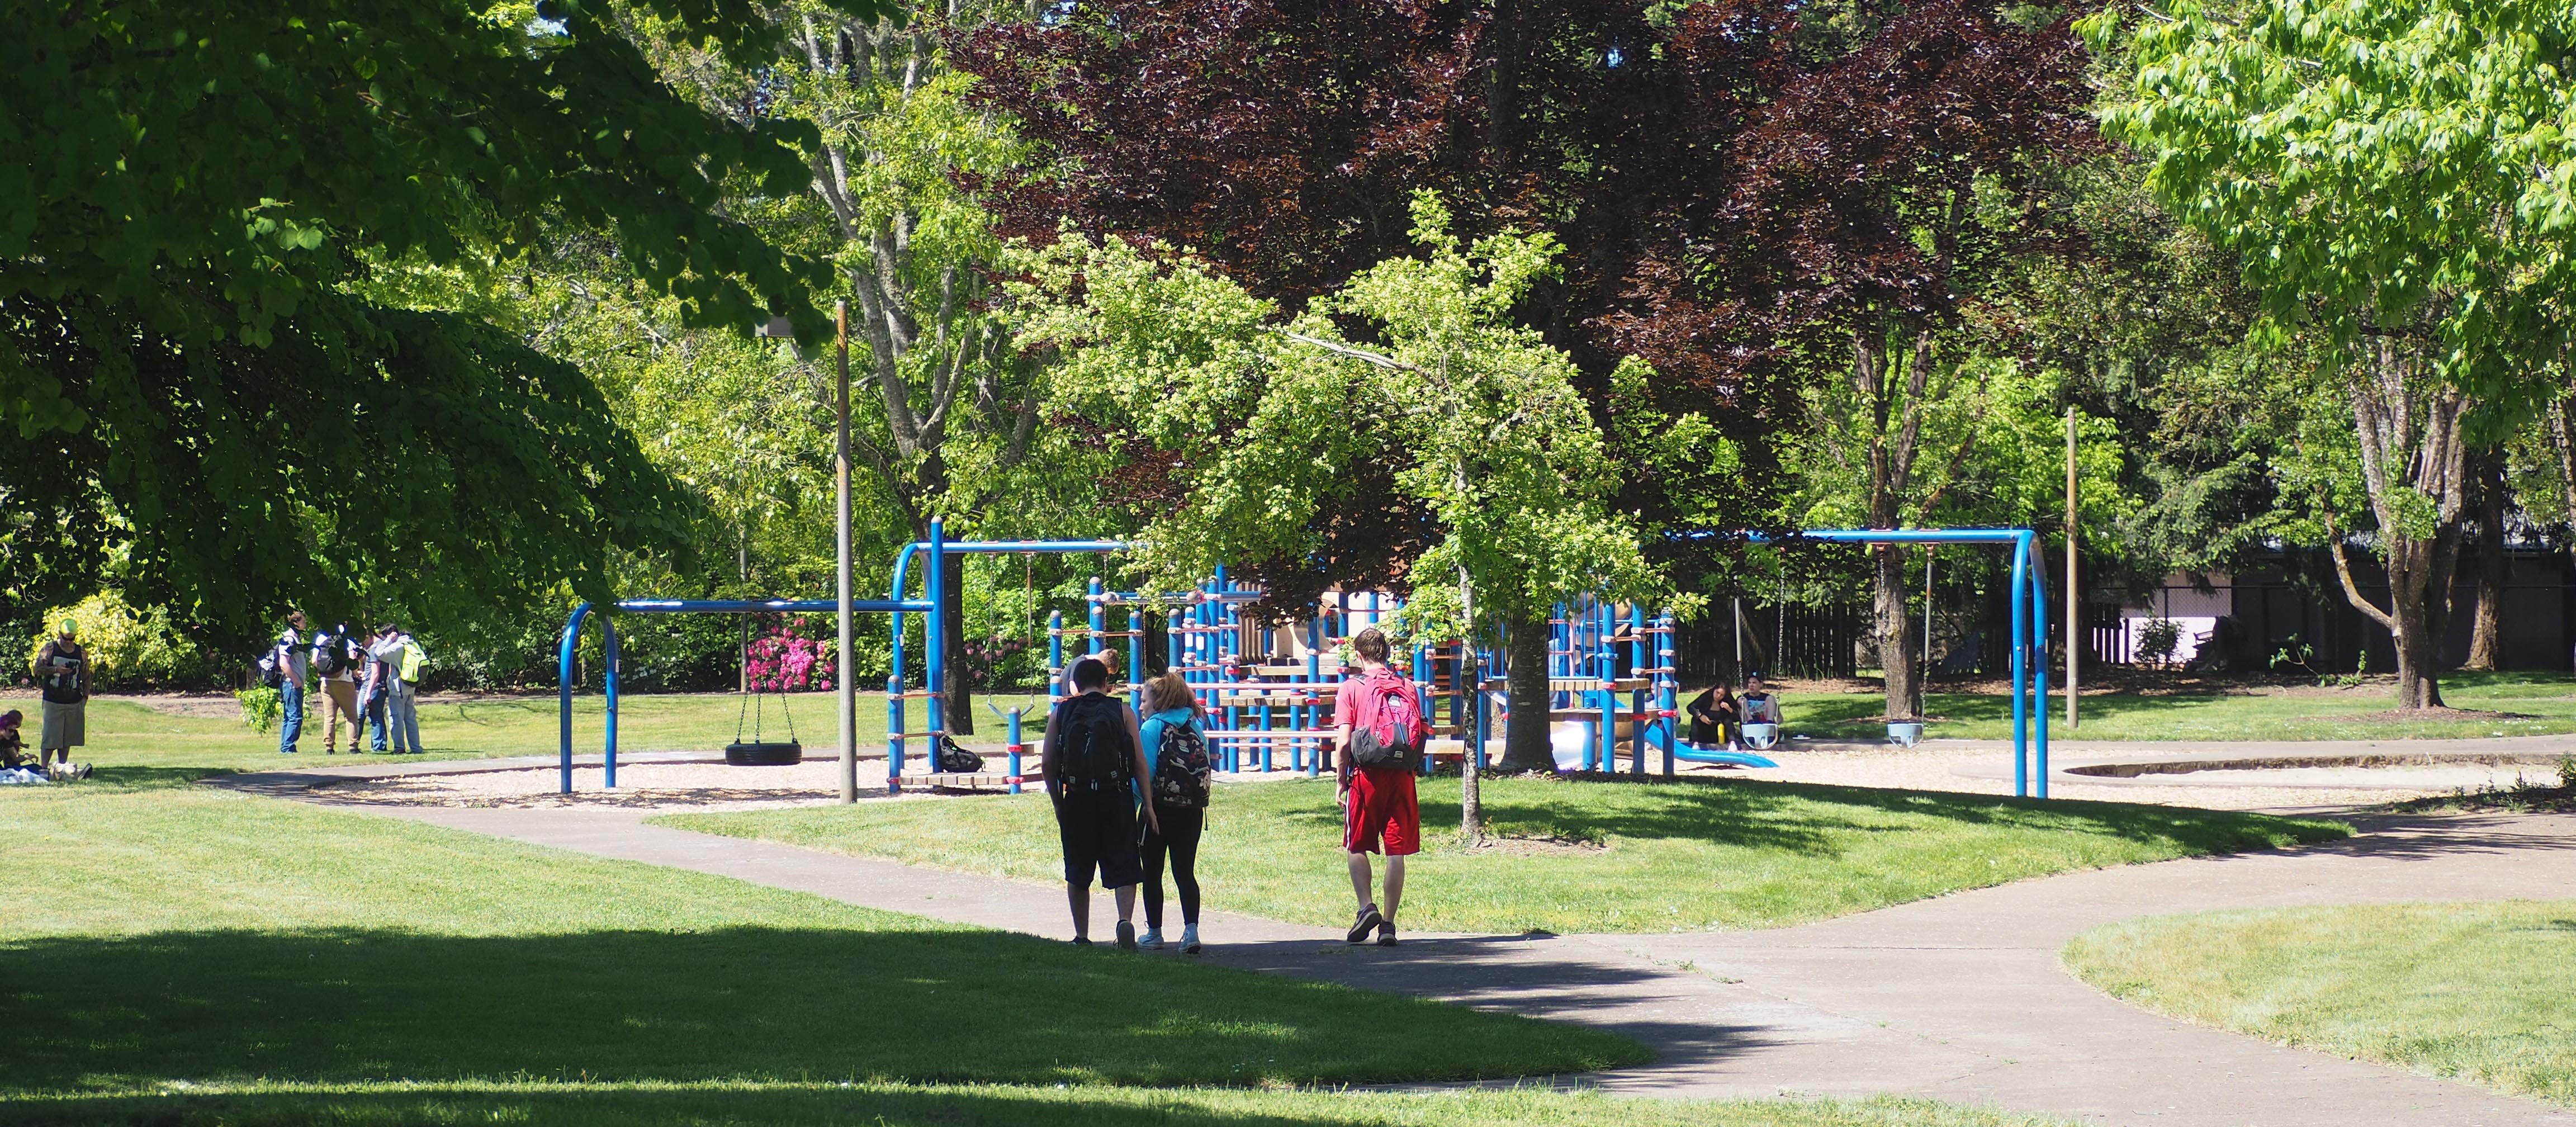 Students walking with backpacks on a paved path toward a playground